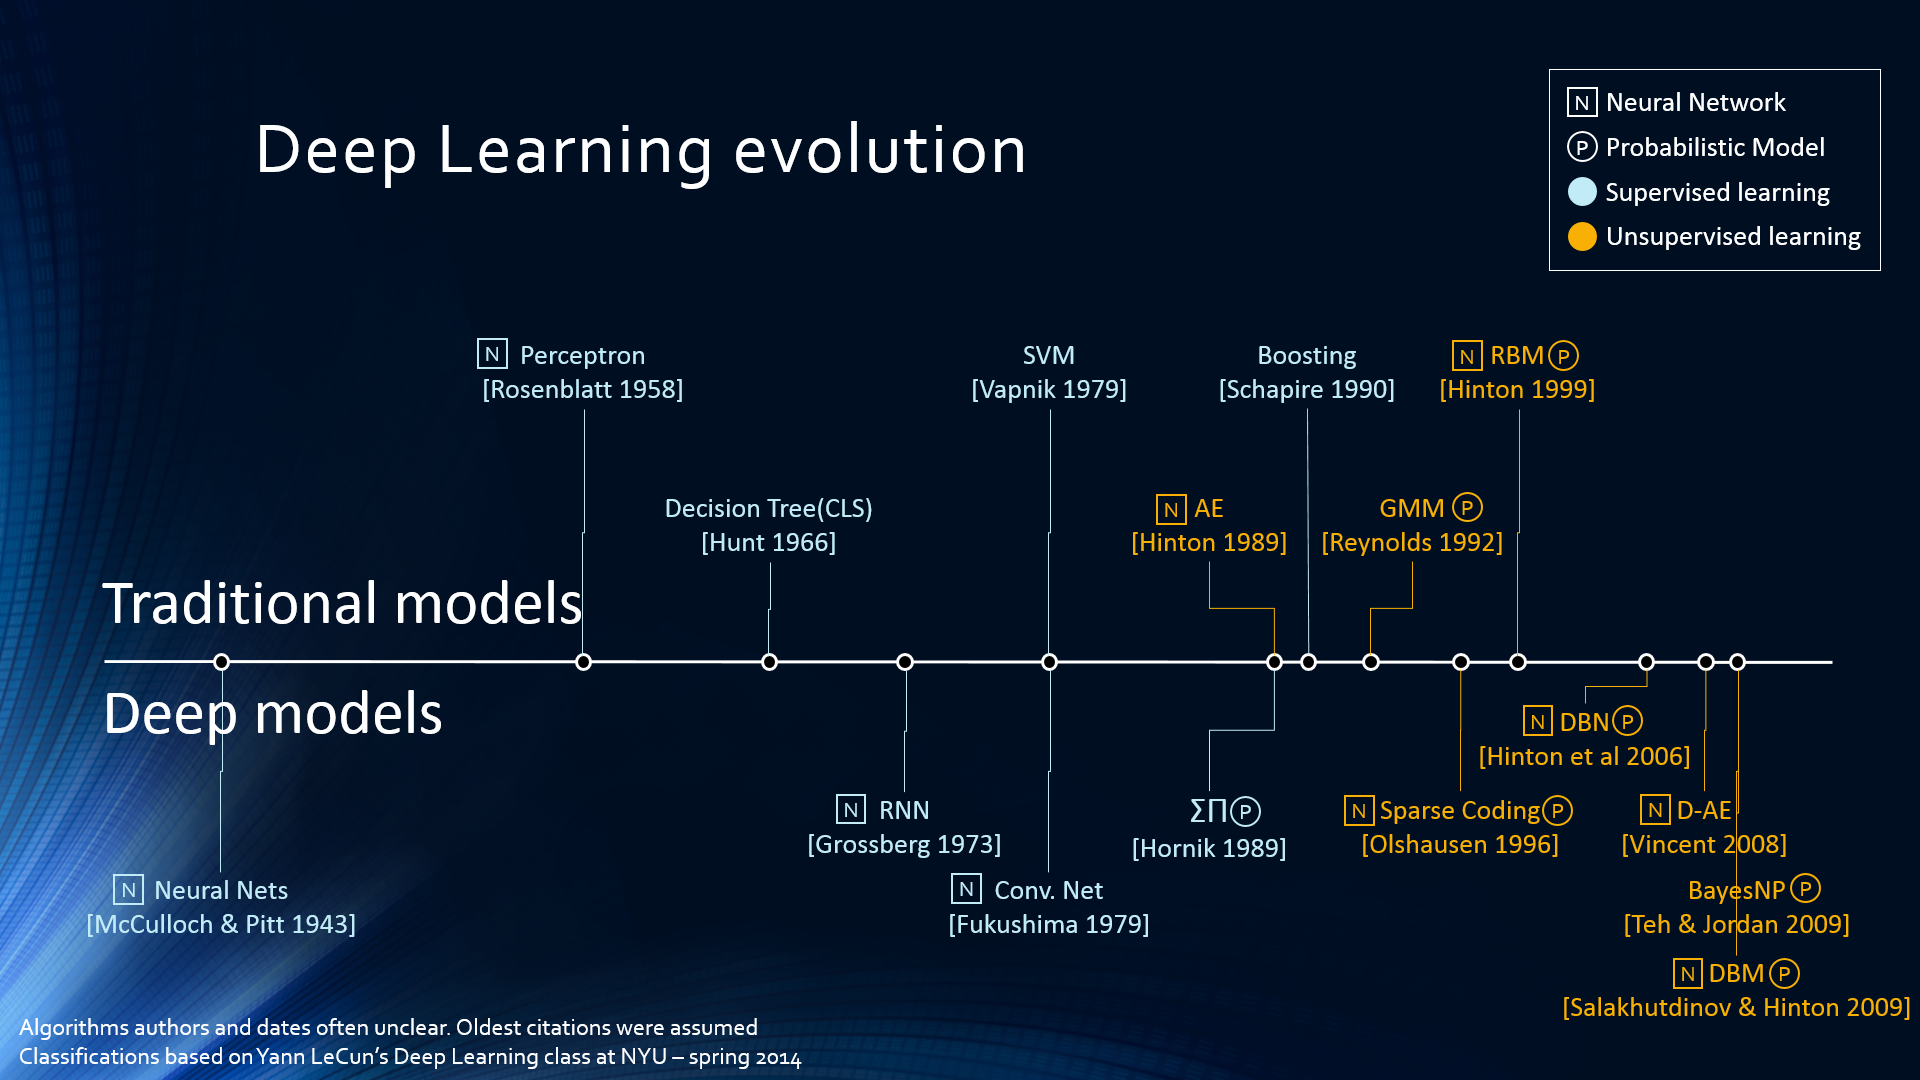 Applications Of Deep Learning Timeline - 1920x1080 Wallpaper 